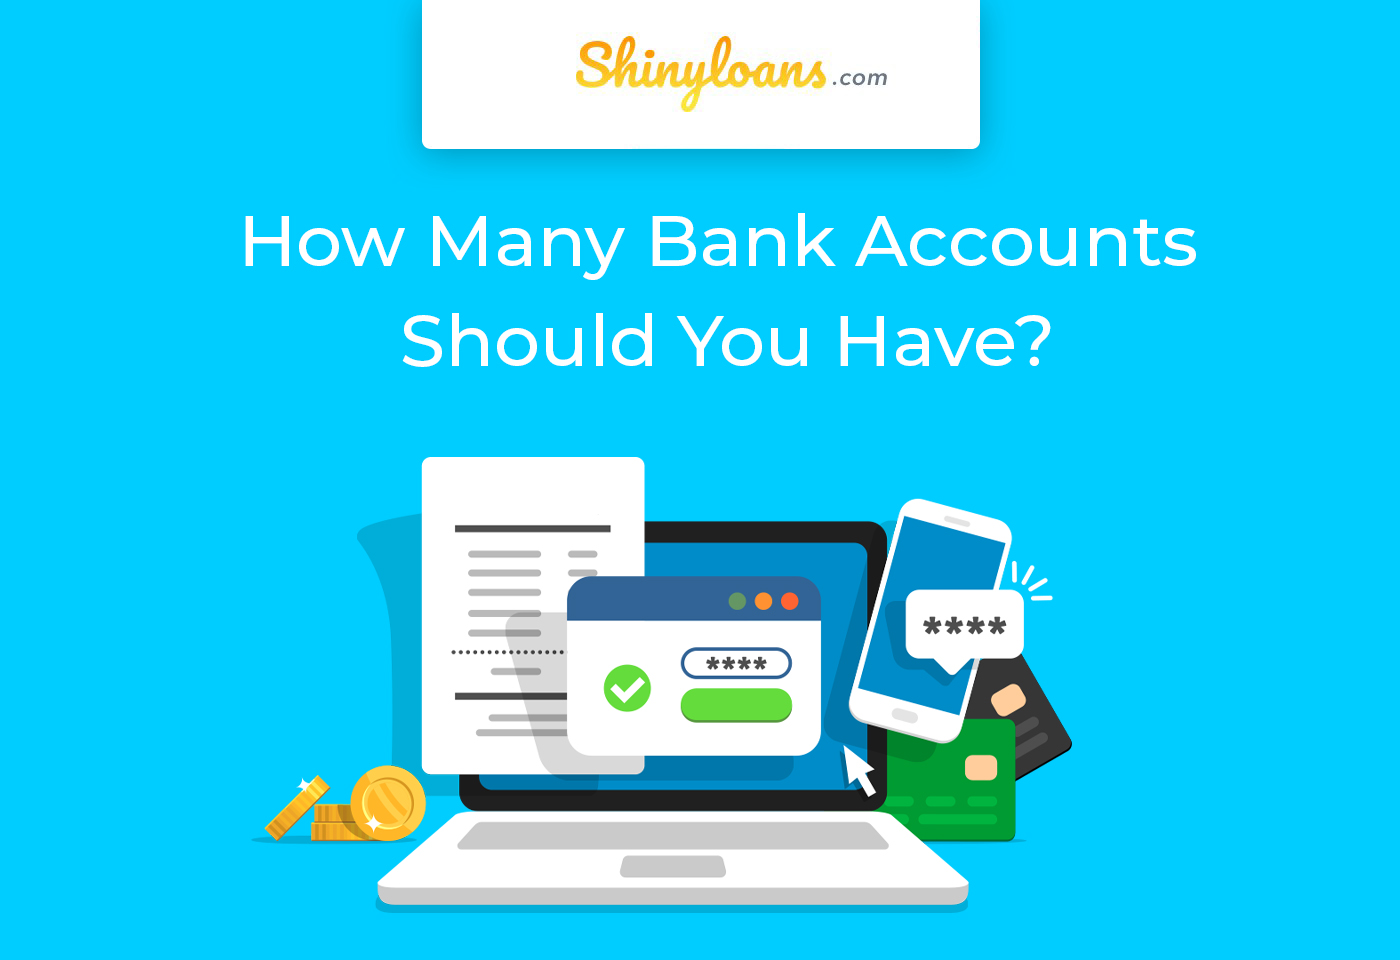 How Many Bank Accounts Should You Have?